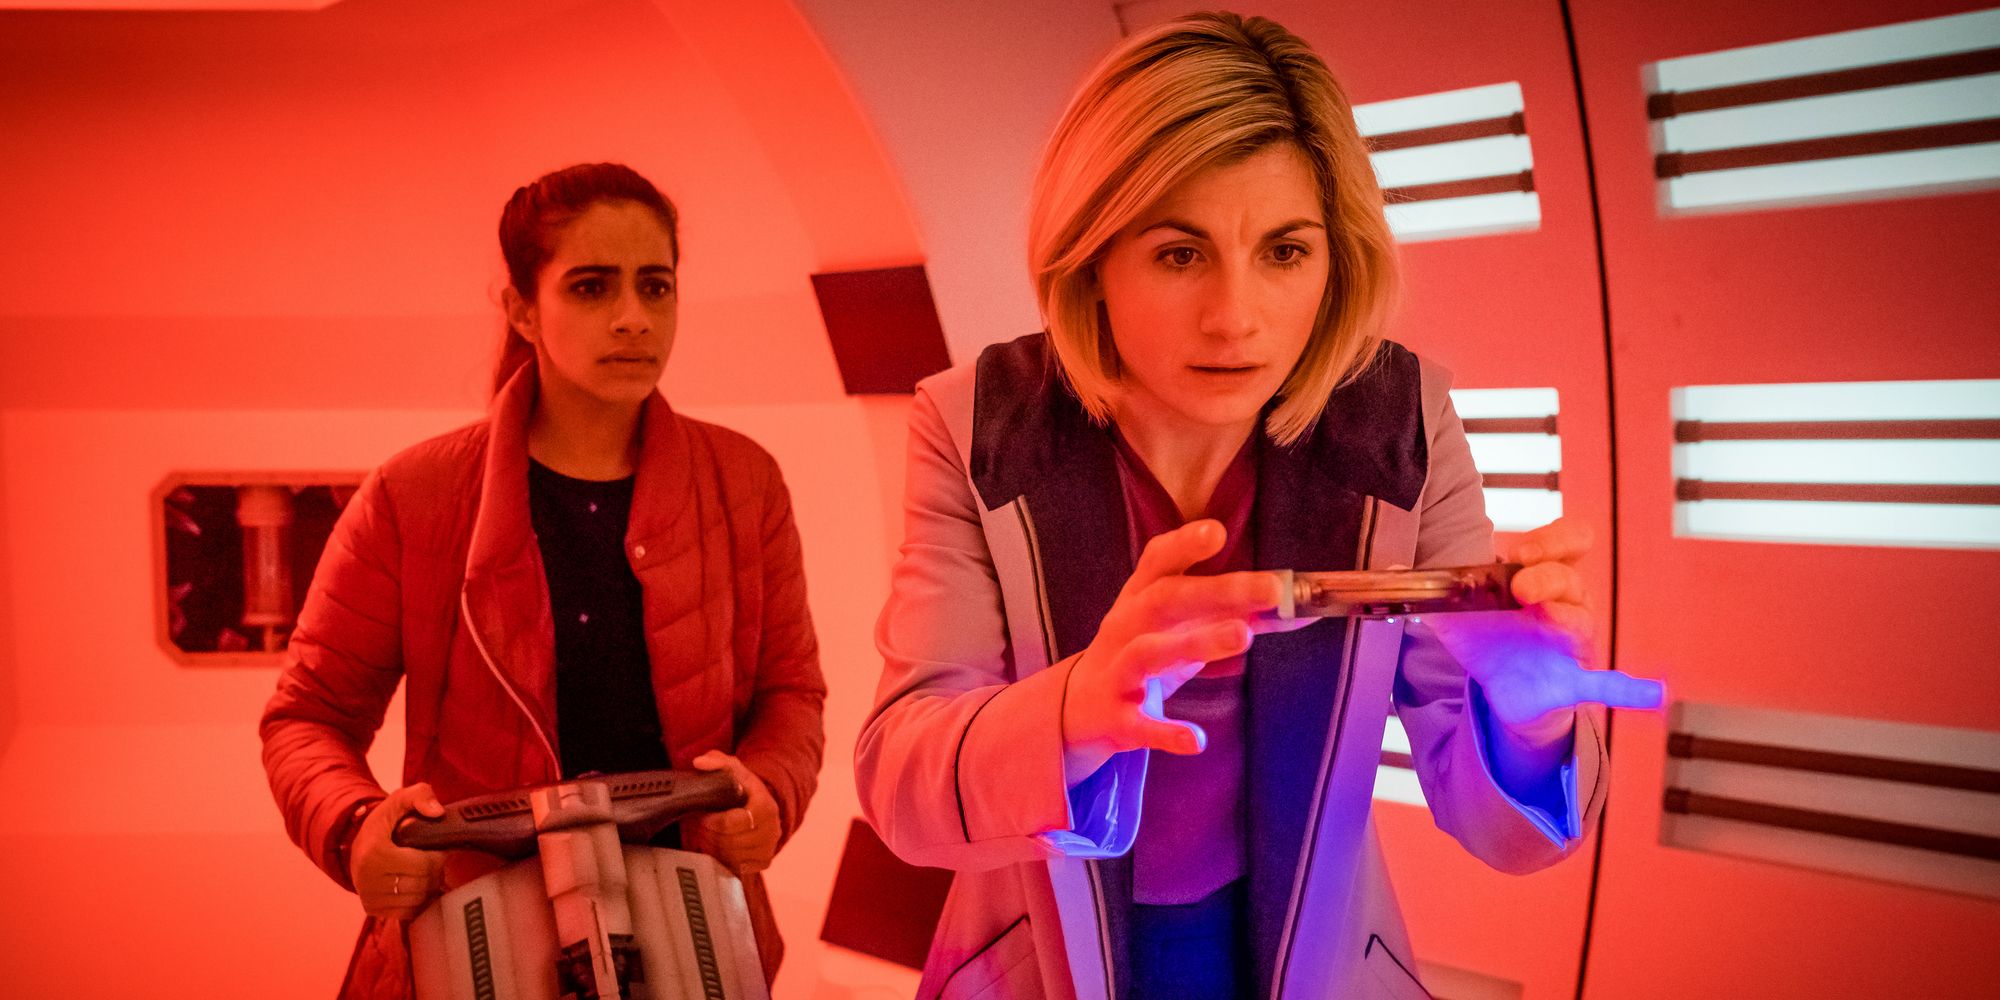 Mandip Gill and Jodie Whittaker in Doctor Who season 12